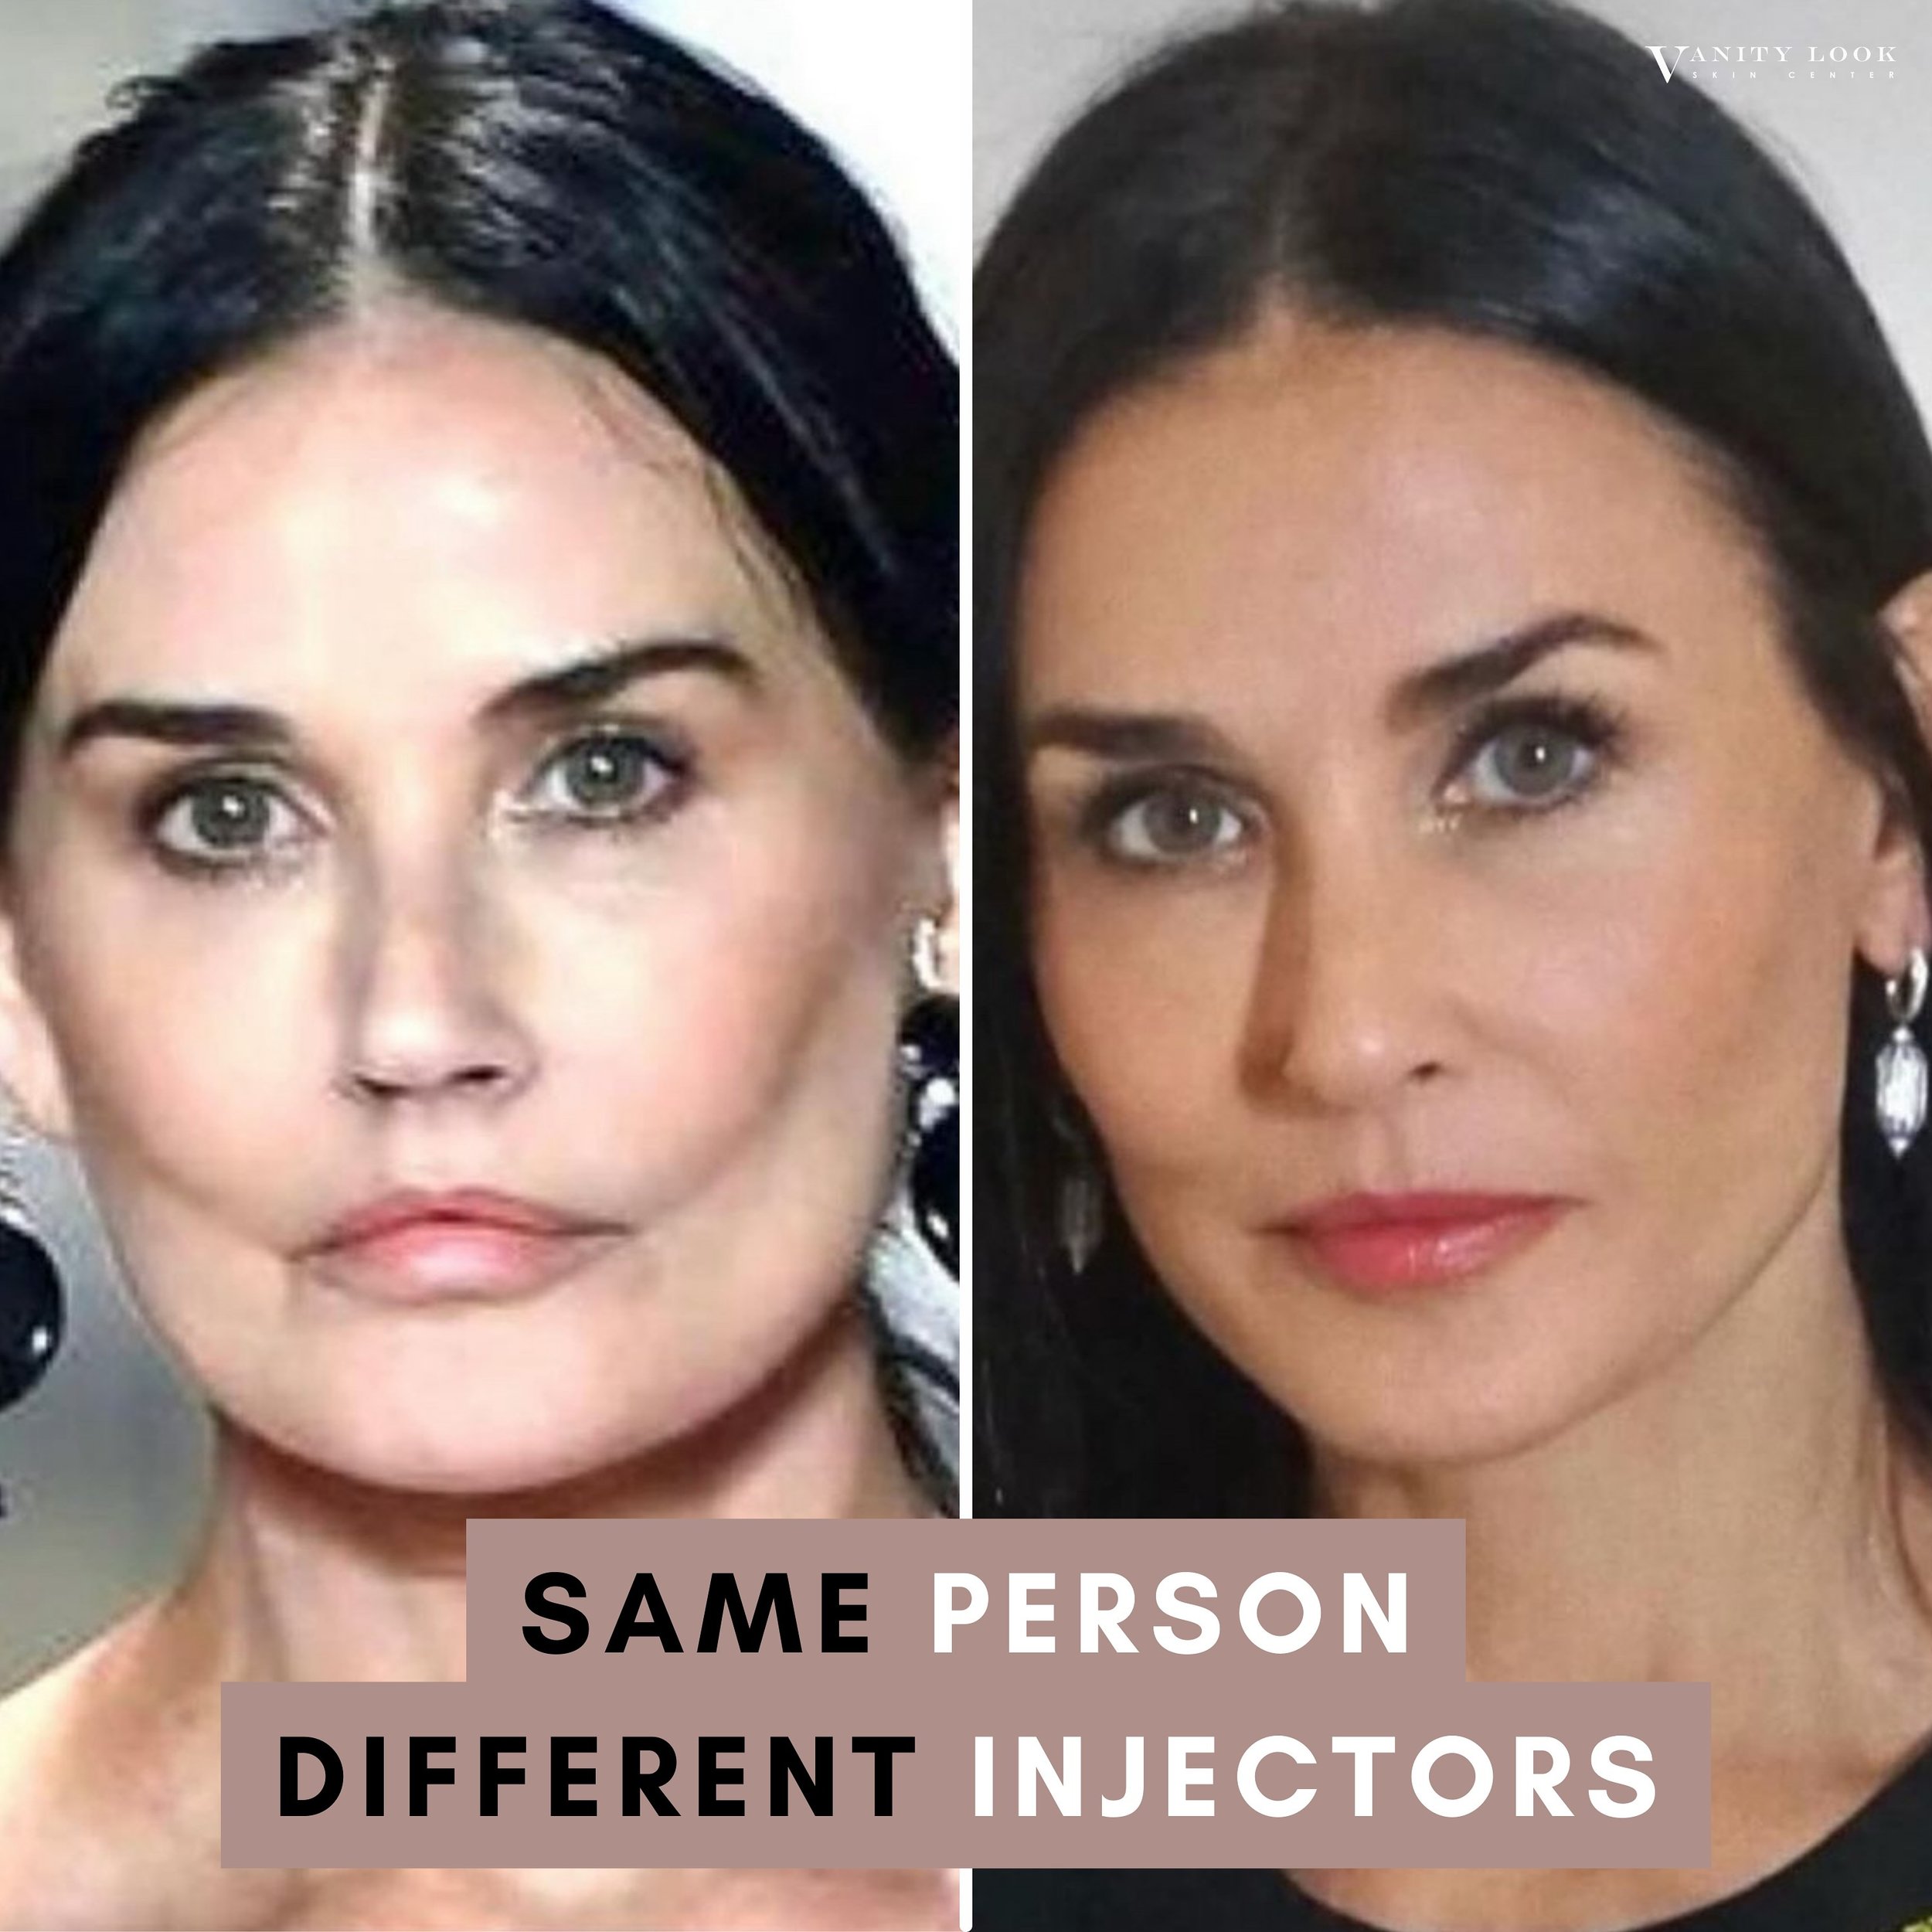 Same PERSON | Different INJECTORS! 💉👄 This is the importance of having an injector that tell you the truth and won&rsquo;t overdo it!

Services we offer:
▪️ Fillers
▪️ Anti-aging treatments
▪️ Facial Balancing
▪️ Laser Hair Removal
▪️ Skin Rejuvena